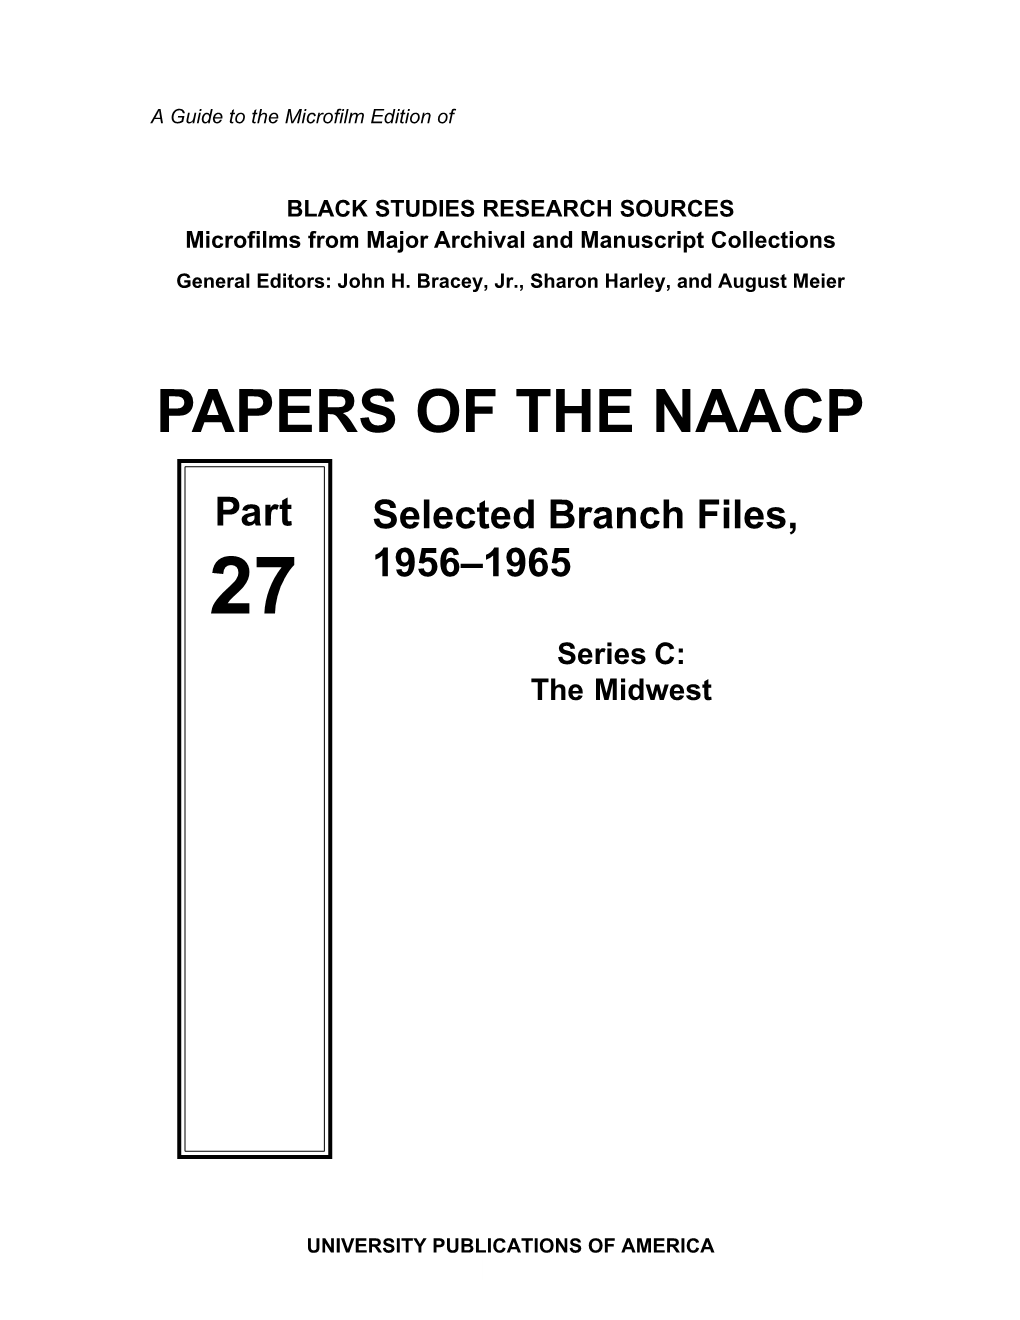 Papers of the Naacp